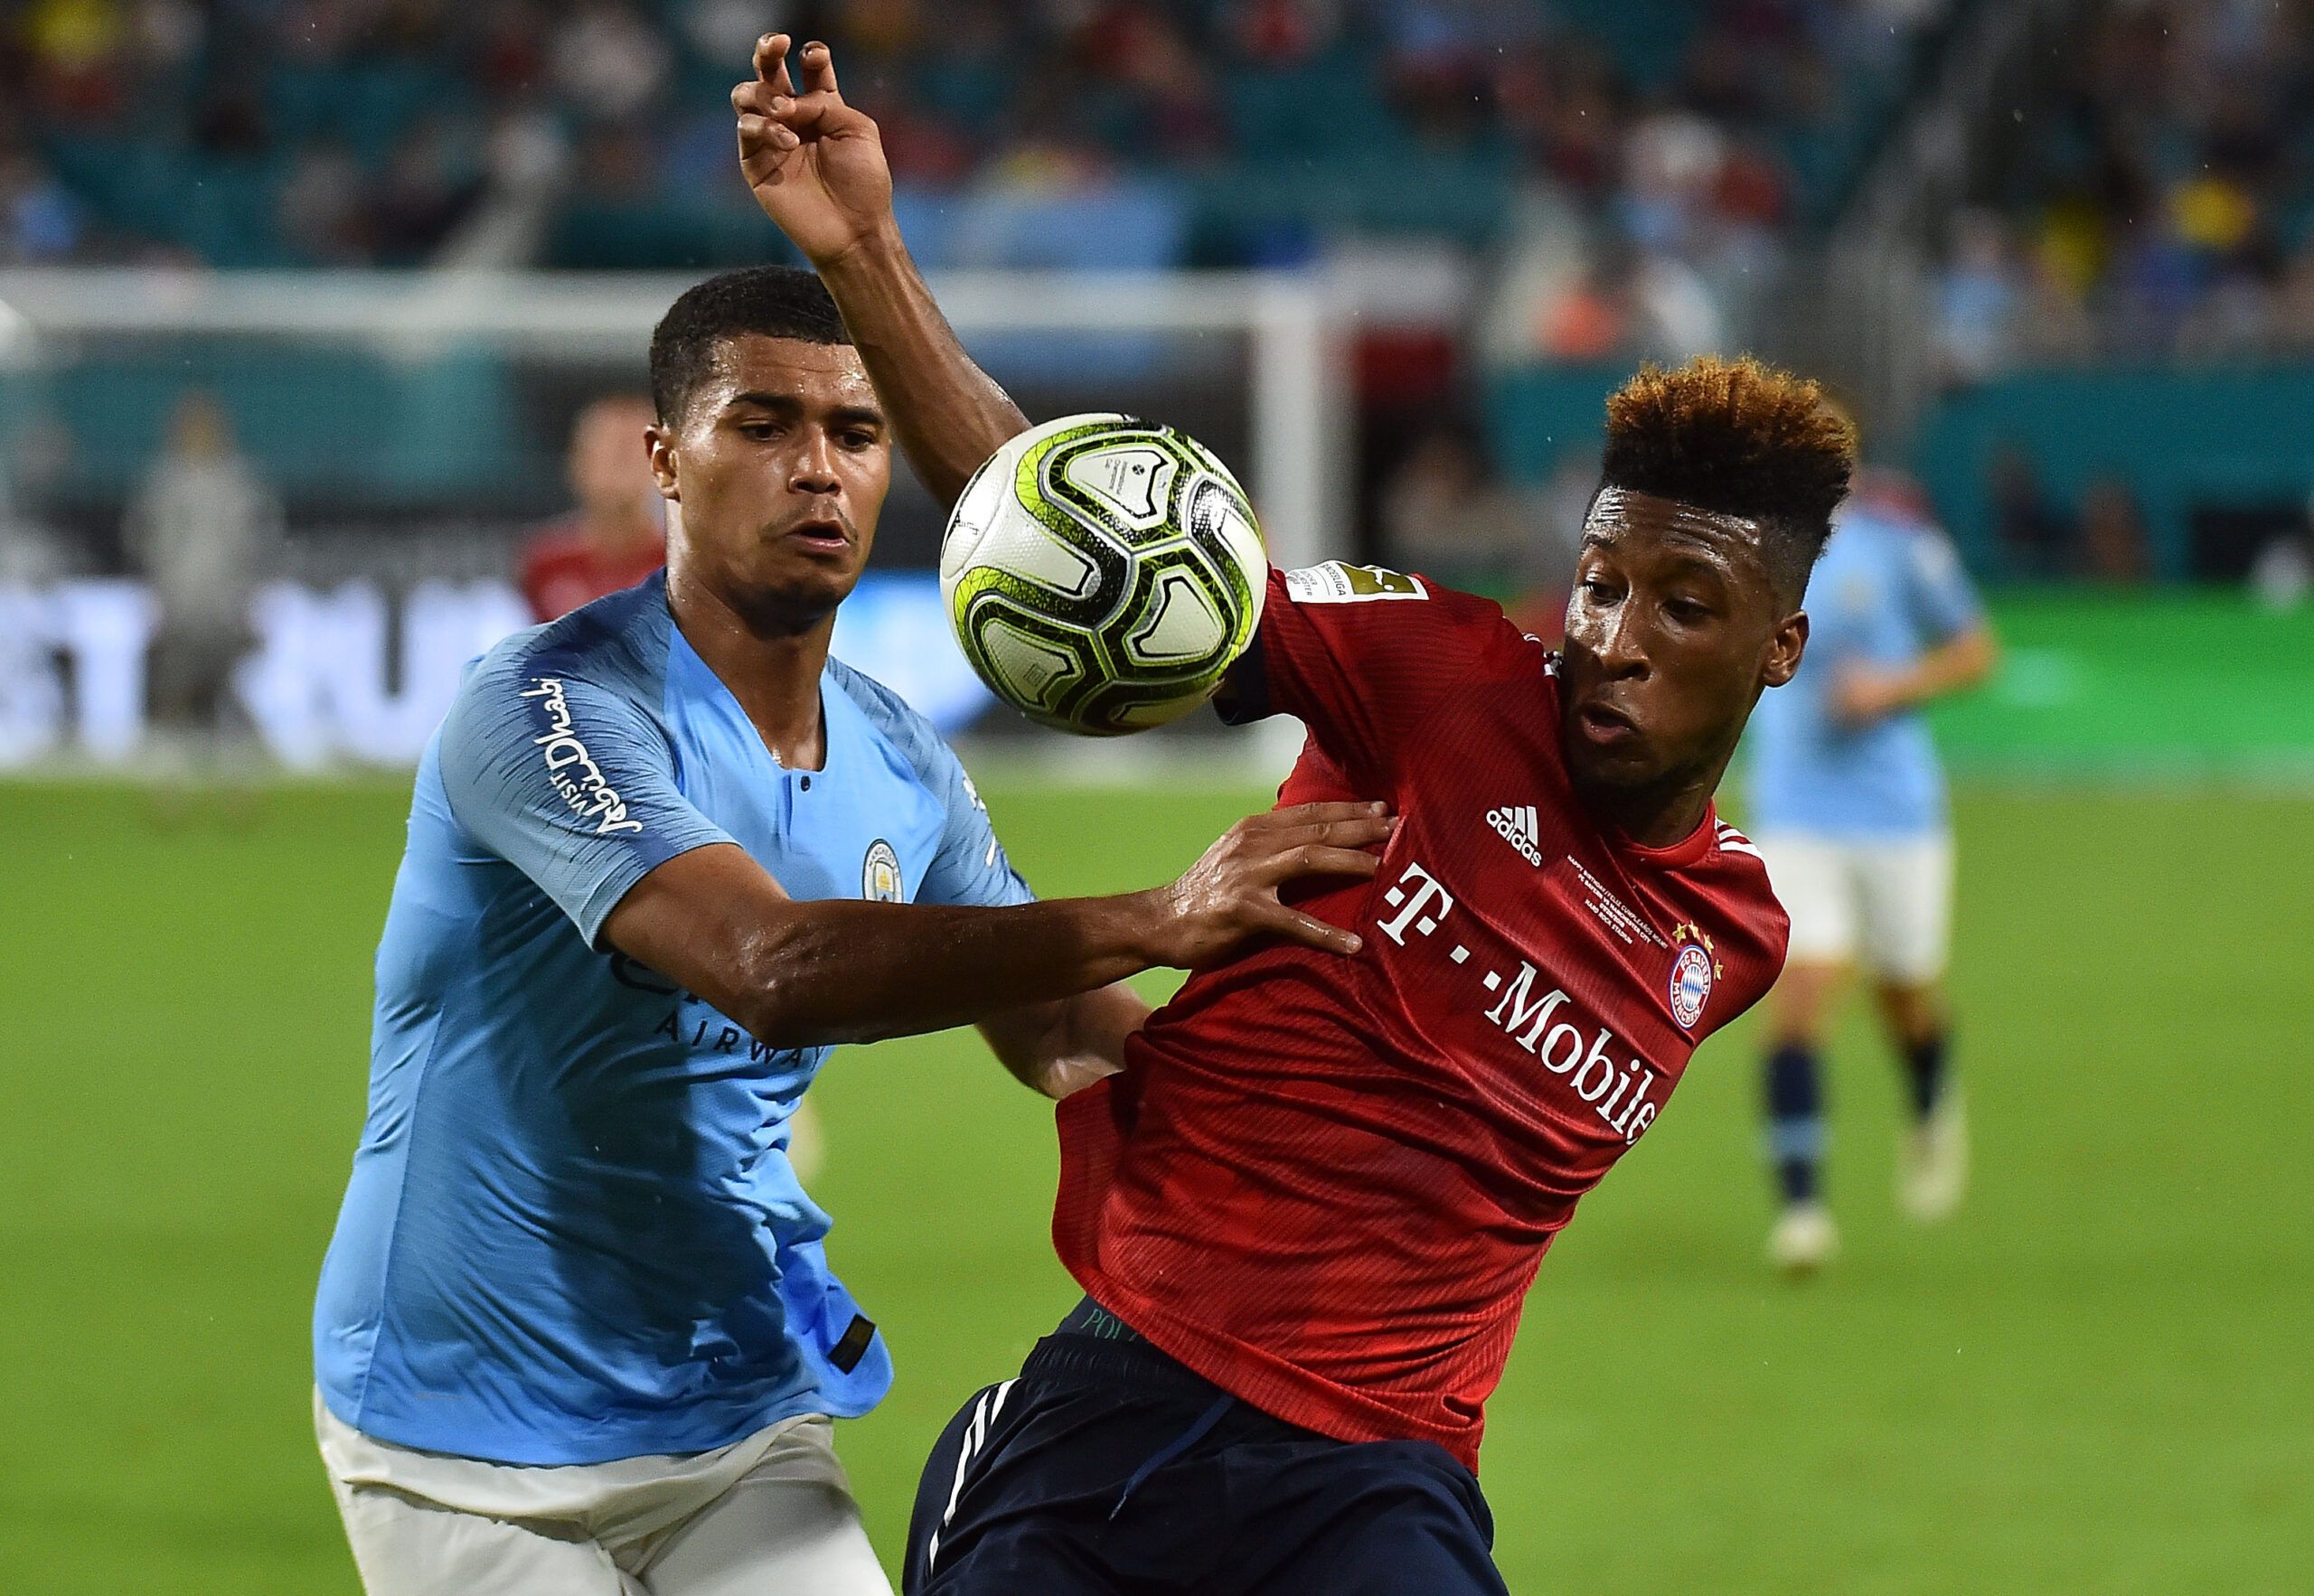 Jul 28, 2018; Miami, FL, USA; Bayern Munich midfielder Kingsley Coman (29) and Manchester City defender Cameron Humphreys (77) battle for the ball during the second half of an International Champions Cup soccer match at Hard Rock Stadium. Mandatory Credit: Jasen Vinlove-USA TODAY Sports